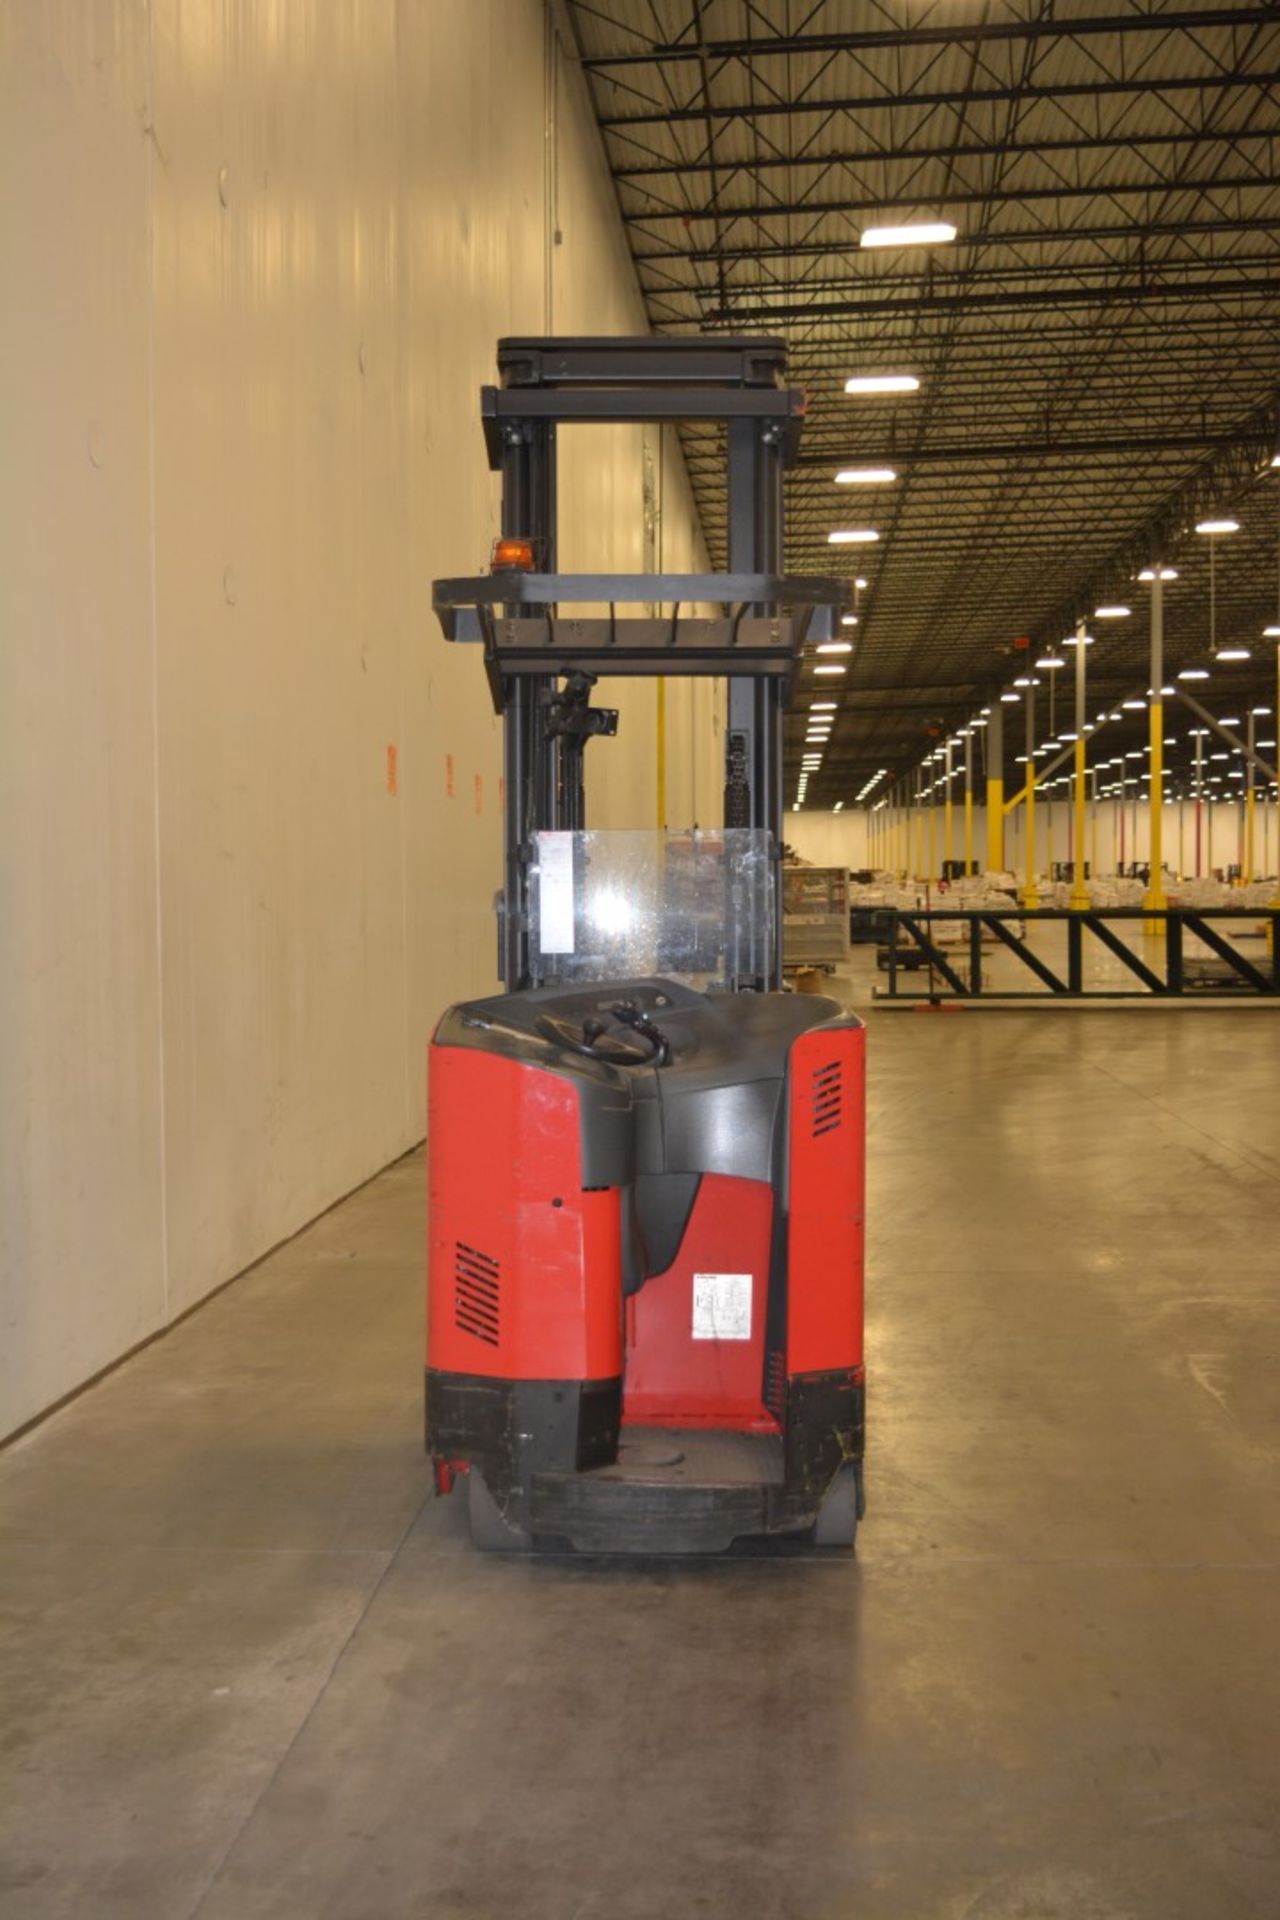 2013 RAYMOND 3200 LBS CAPACITY DOUBLE REACH-IN TRUCK/FORKLIFT. (WATCH VIDEO) - Image 4 of 6